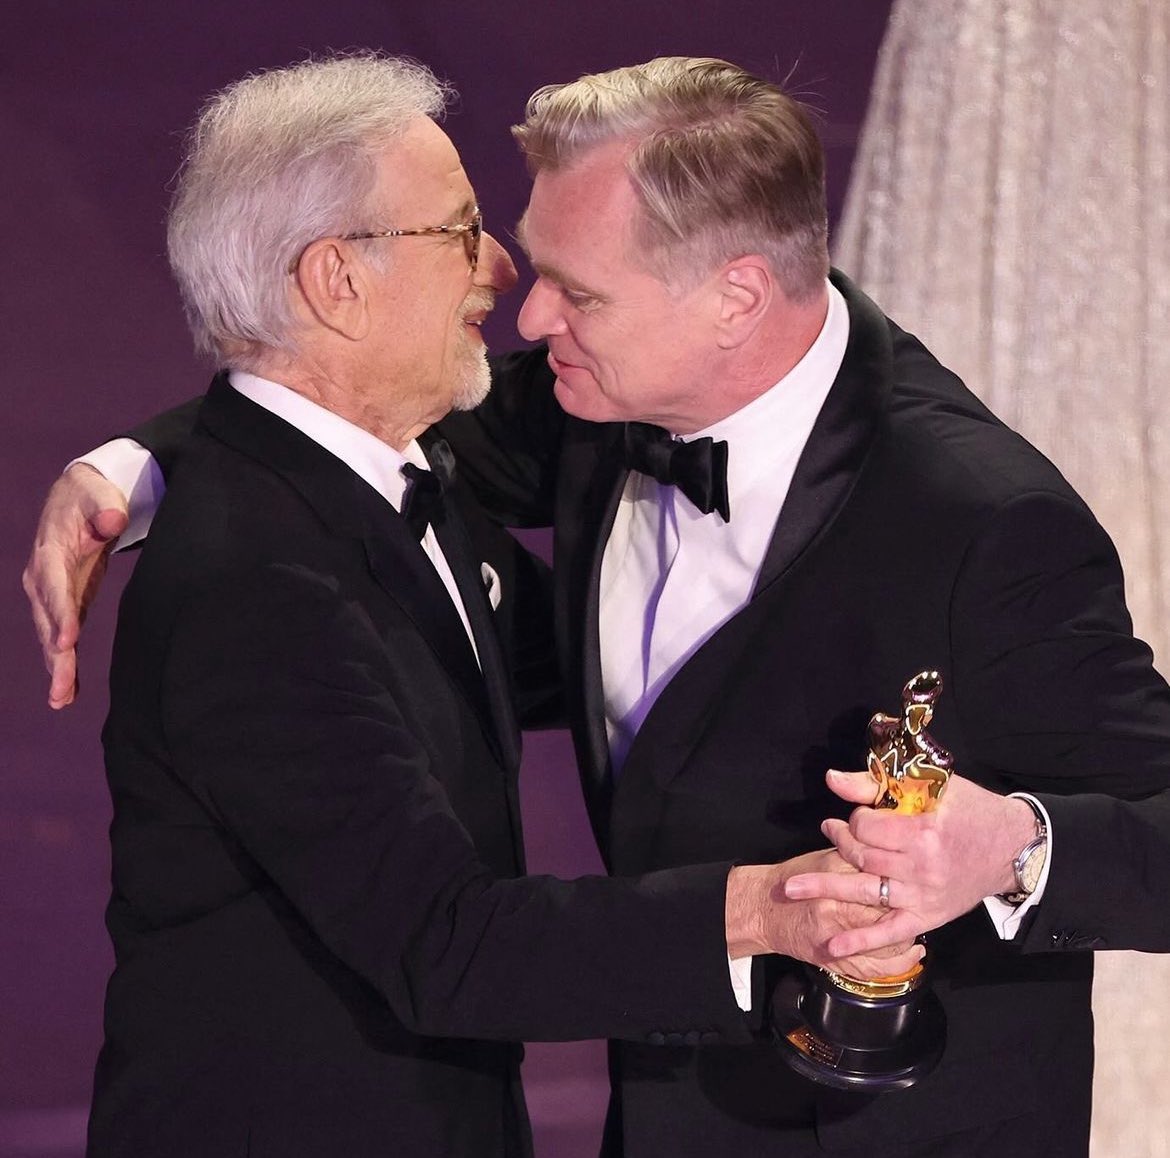 Steven Spielberg Presenting Christopher Nolan With the #Oscar for Best Director Passing the Torch